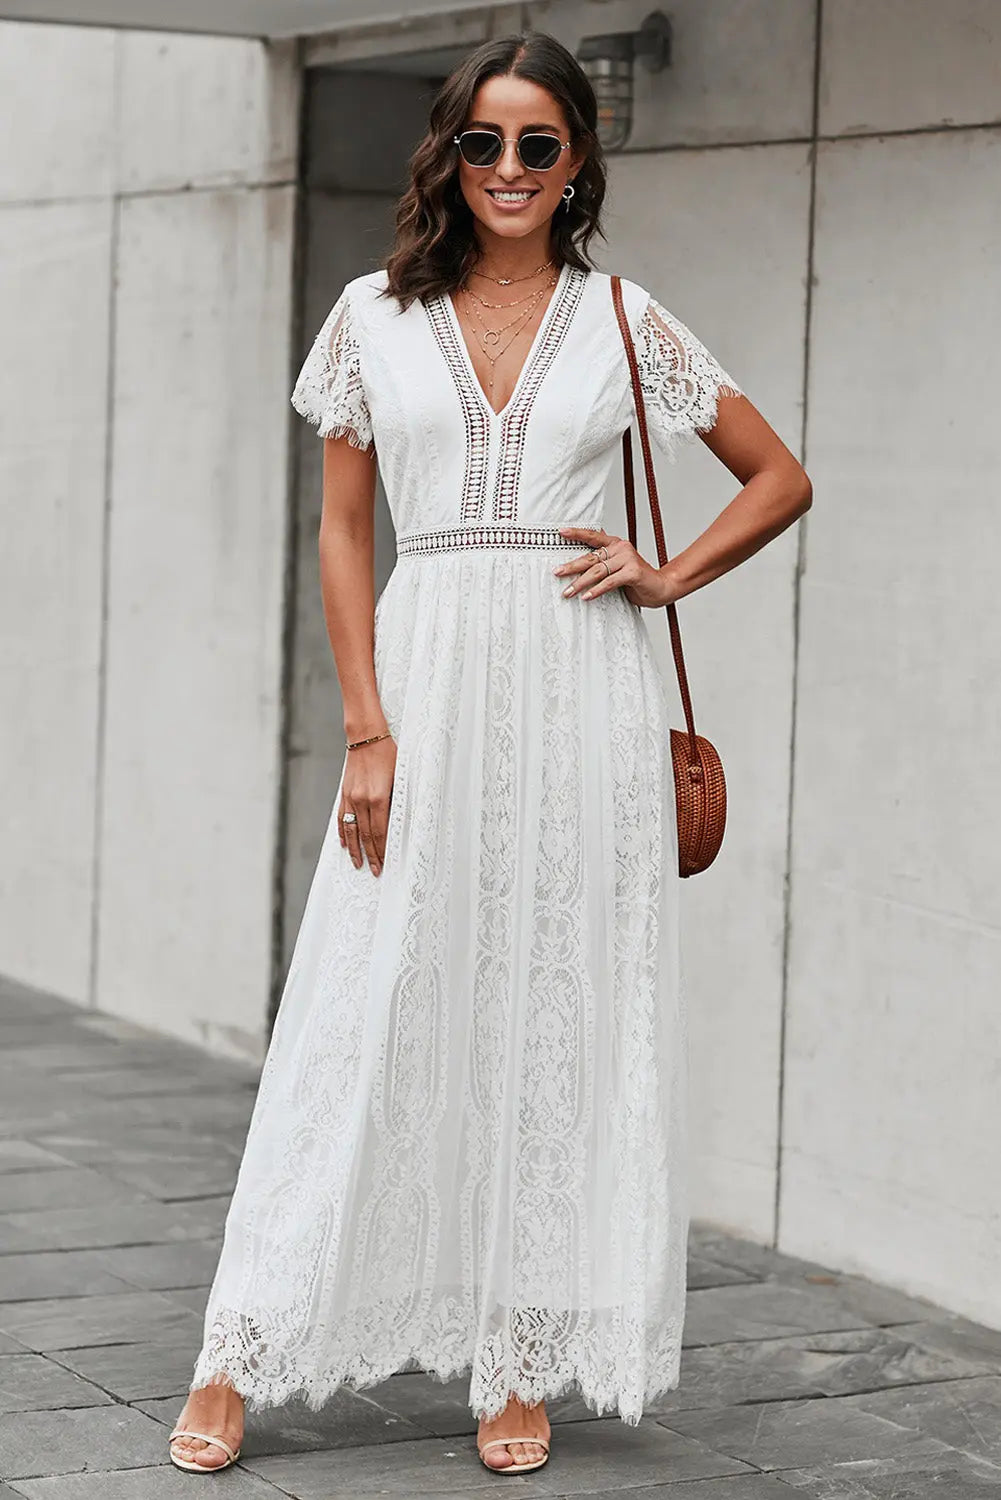 Scalloped Trim Lace Plunge Dress - Hot Trends